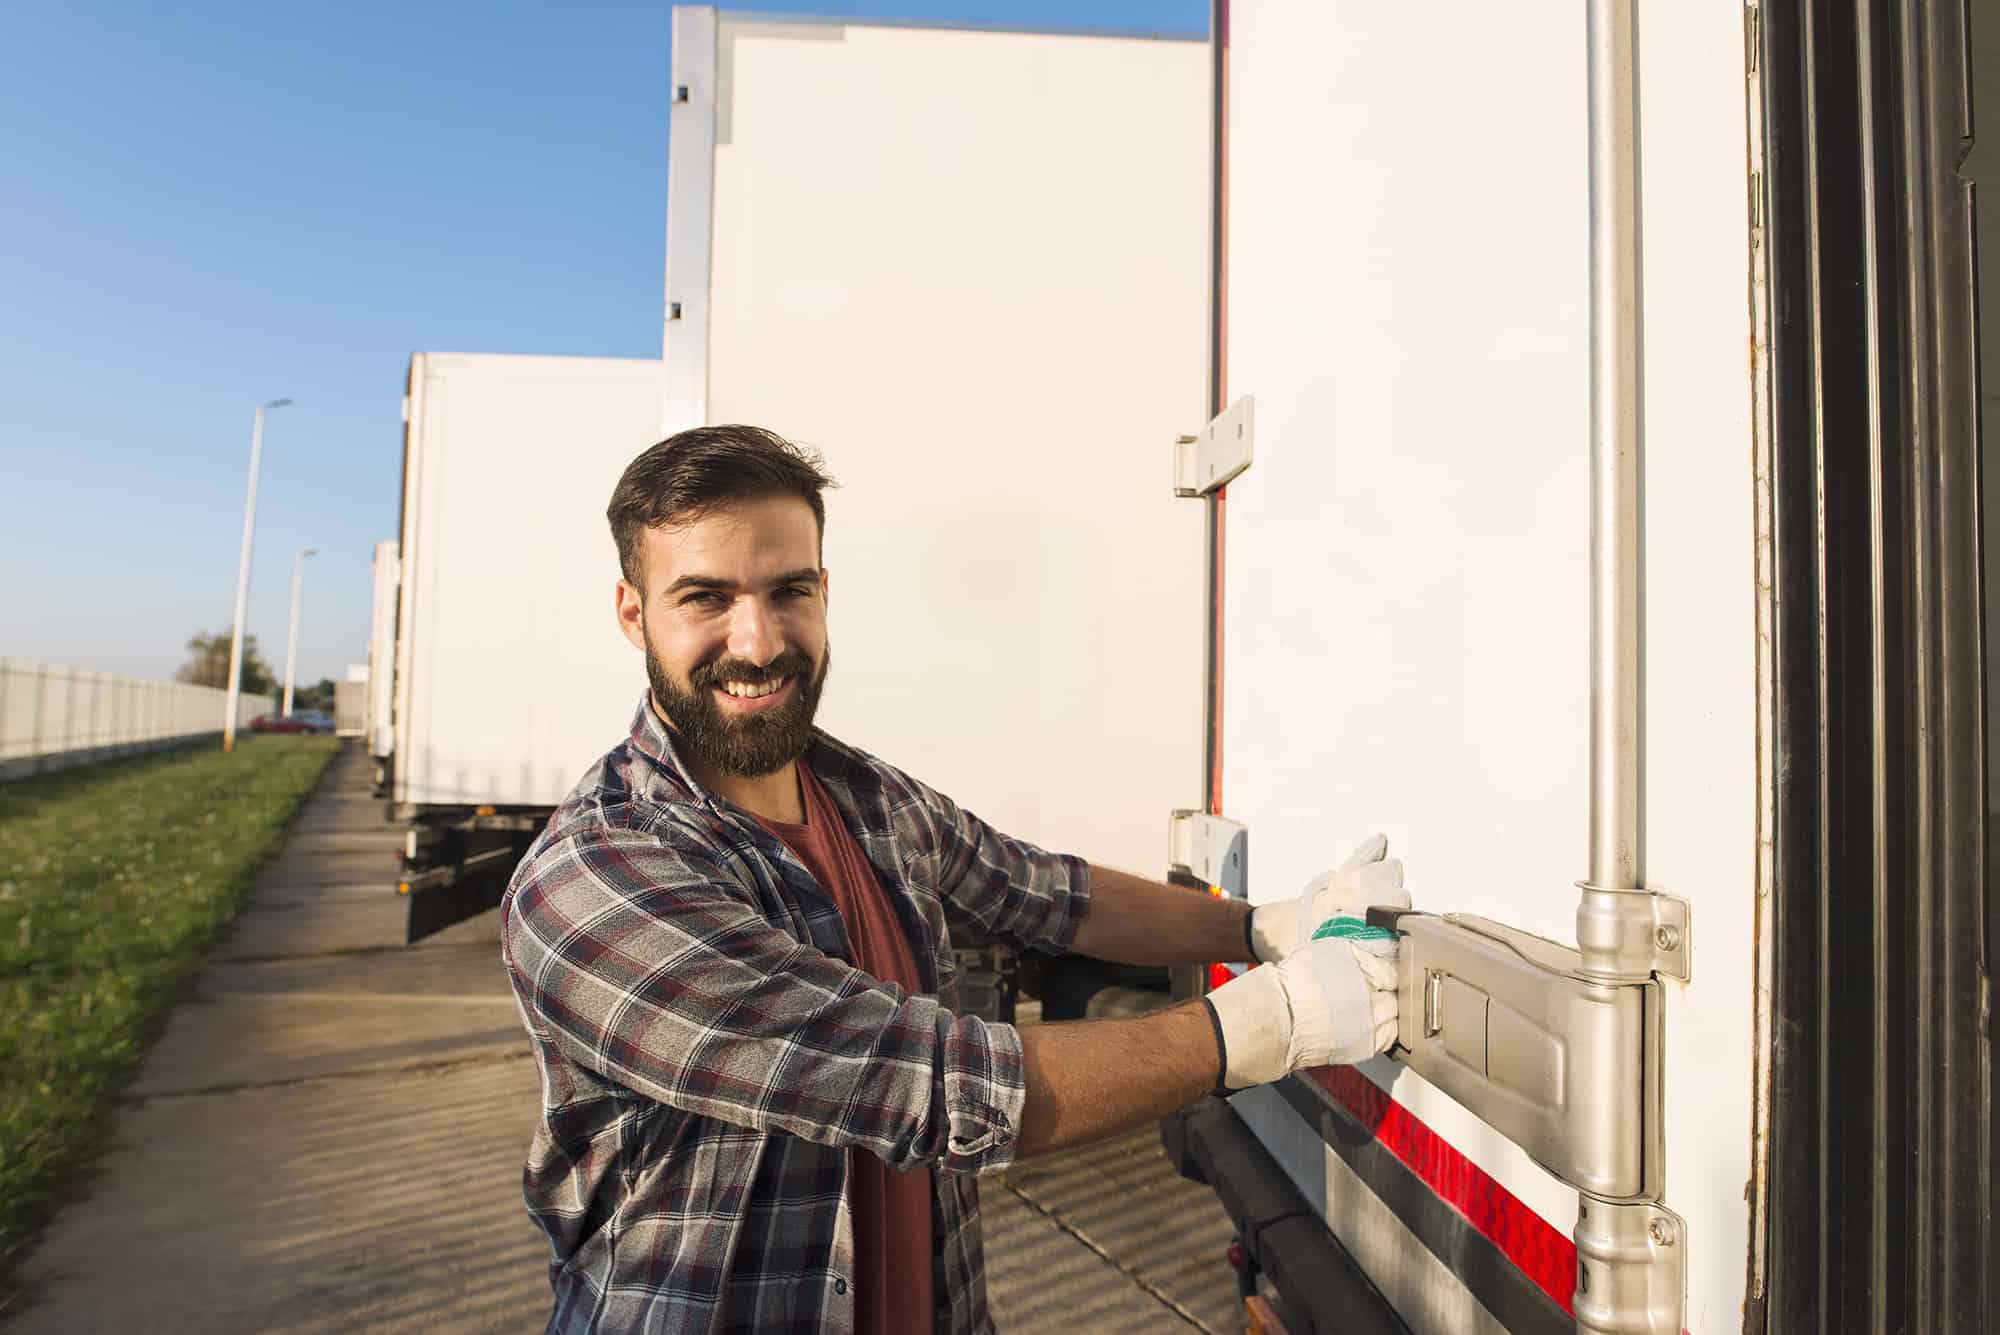 Smiling truck driver in working gloves opening or closing truck